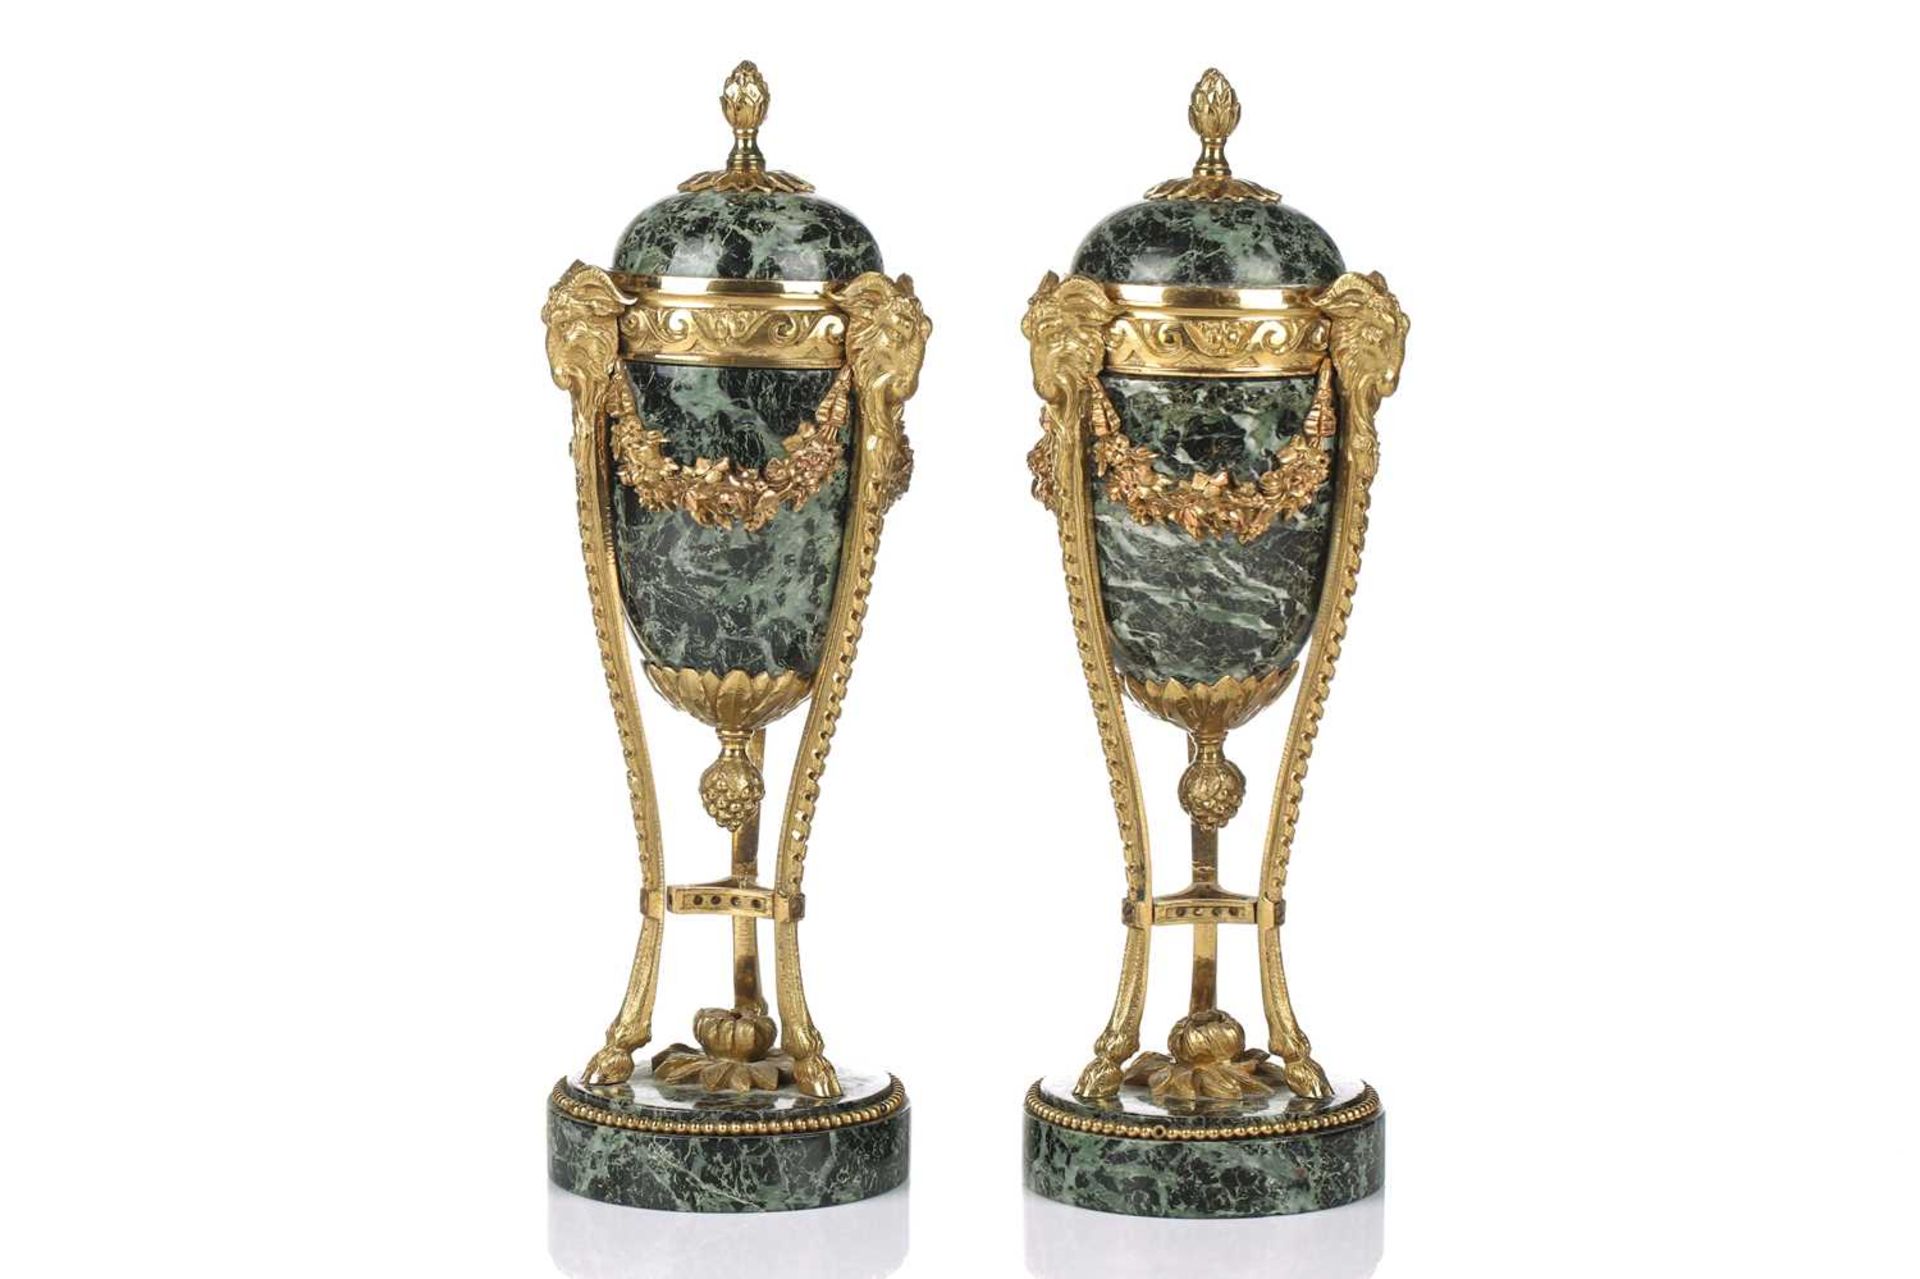 A fine pair of Louis XVI style ormolu and variegated green marble cassolettes of classical urn form, - Image 14 of 14